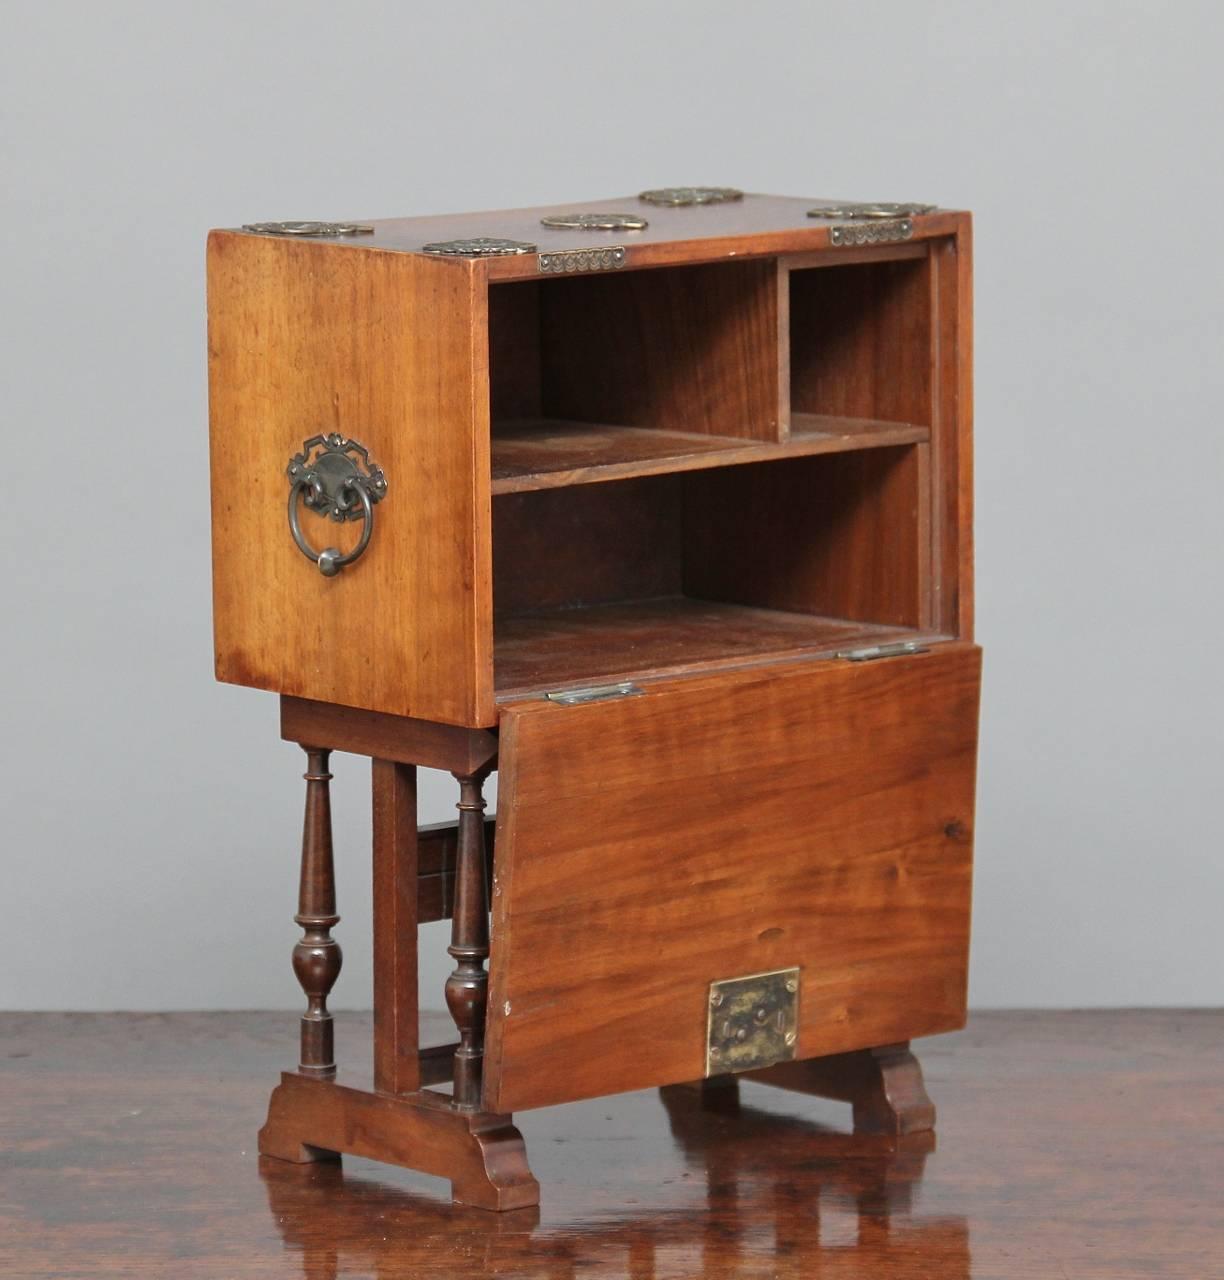 19th century Spanish miniature walnut vargueno on stand decorated with white metal fittings, opening to reveal various compartments, the lovely shaped base with turned spindle supports standing on block feet, circa 1880.